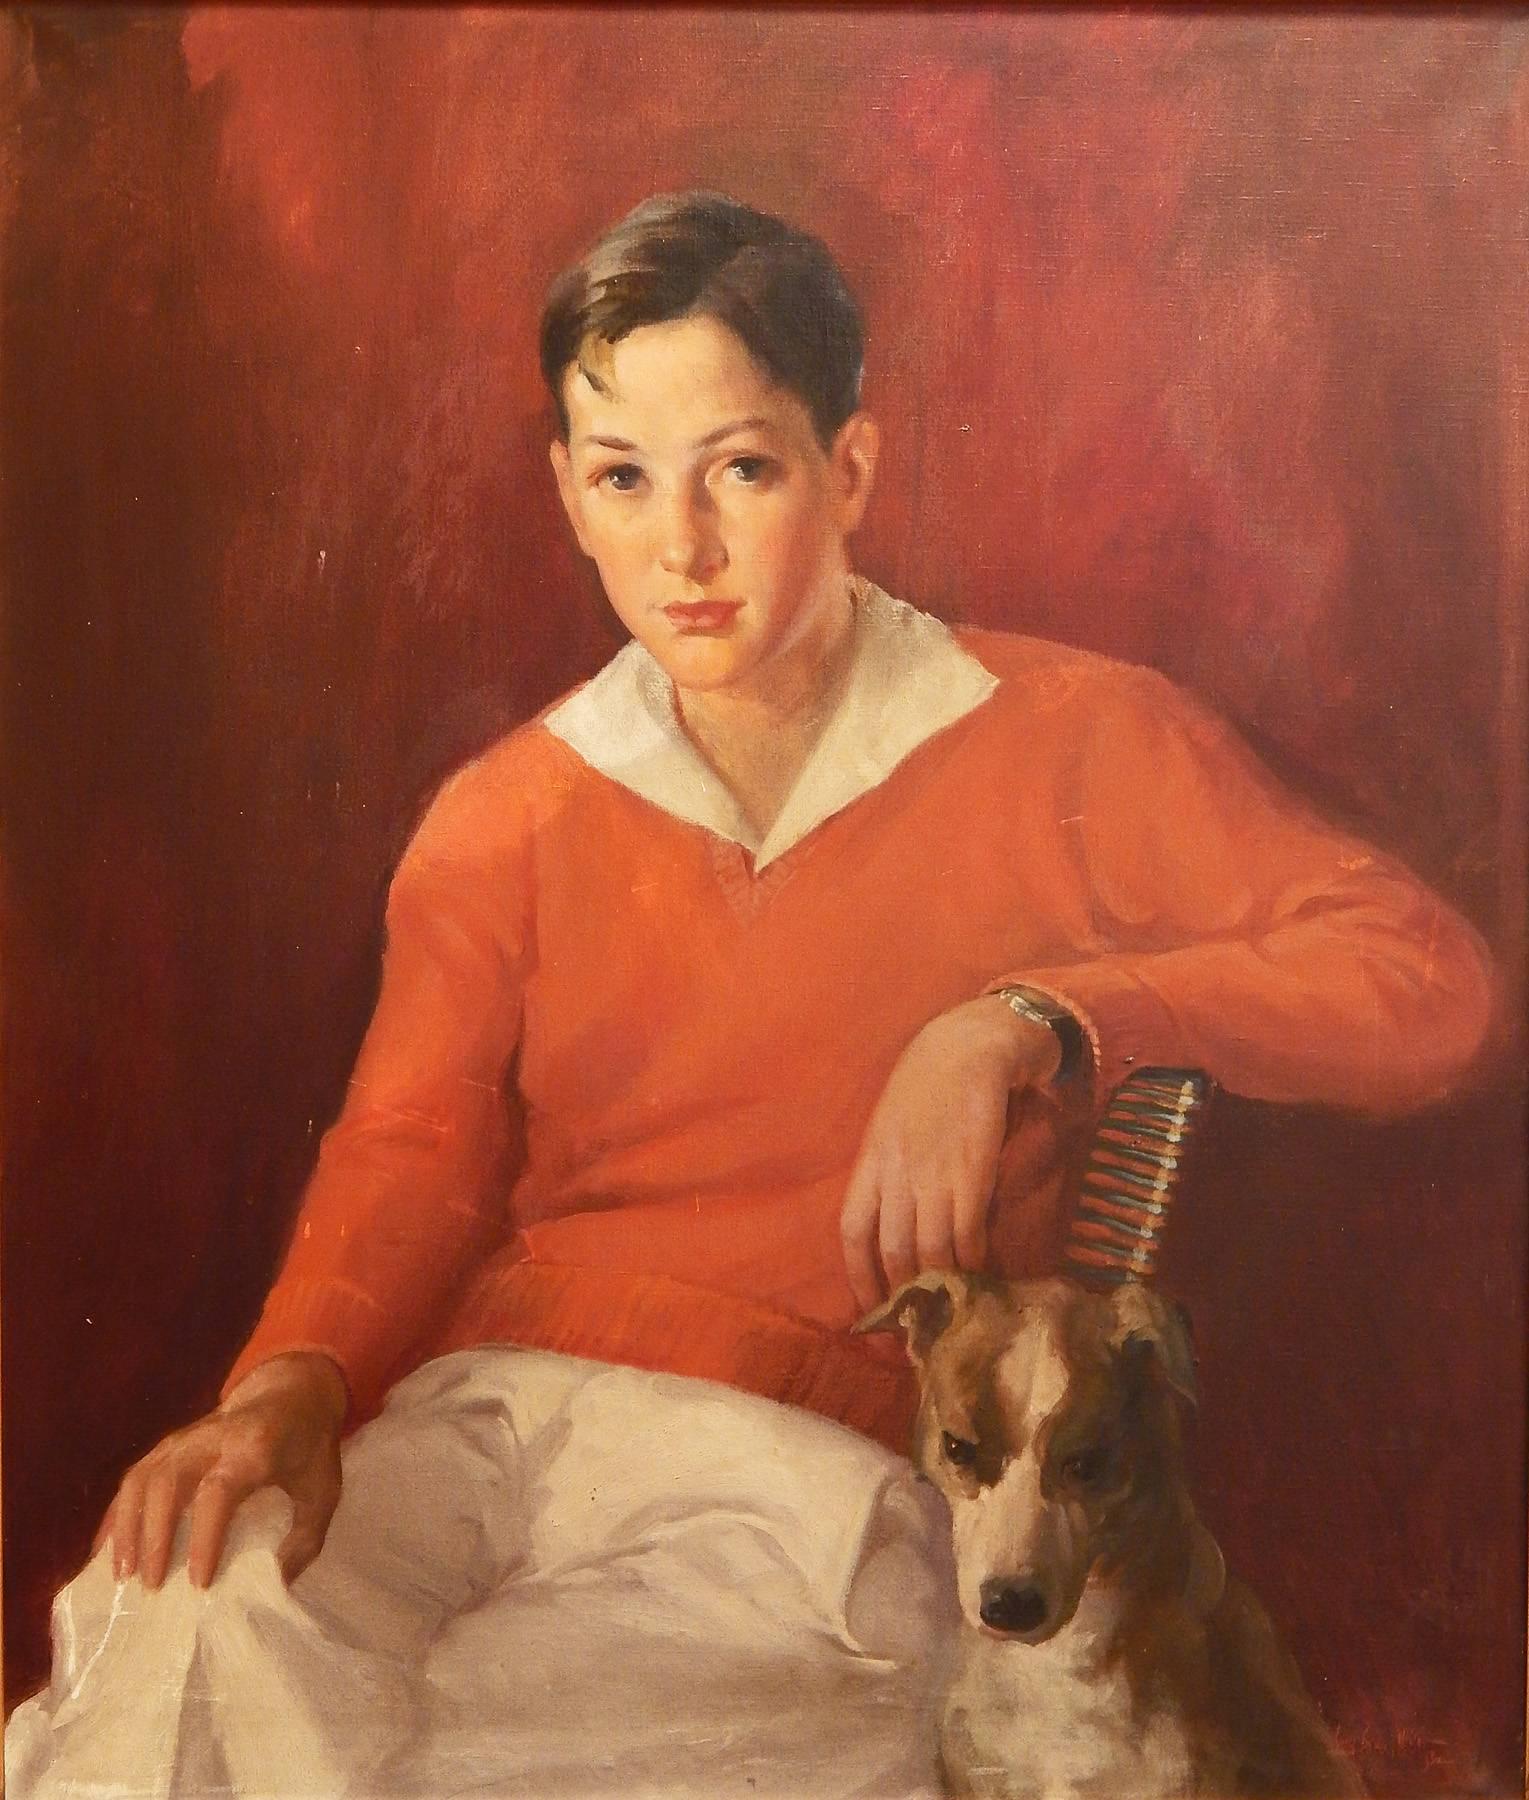 One of the finest Art Deco-era portraits we have ever seen, this depiction of a young man with his loyal hound leaning against his leg, all in gorgeous shades of ivory, carmen and deep red, is a character study of quiet, youthful confidence. We